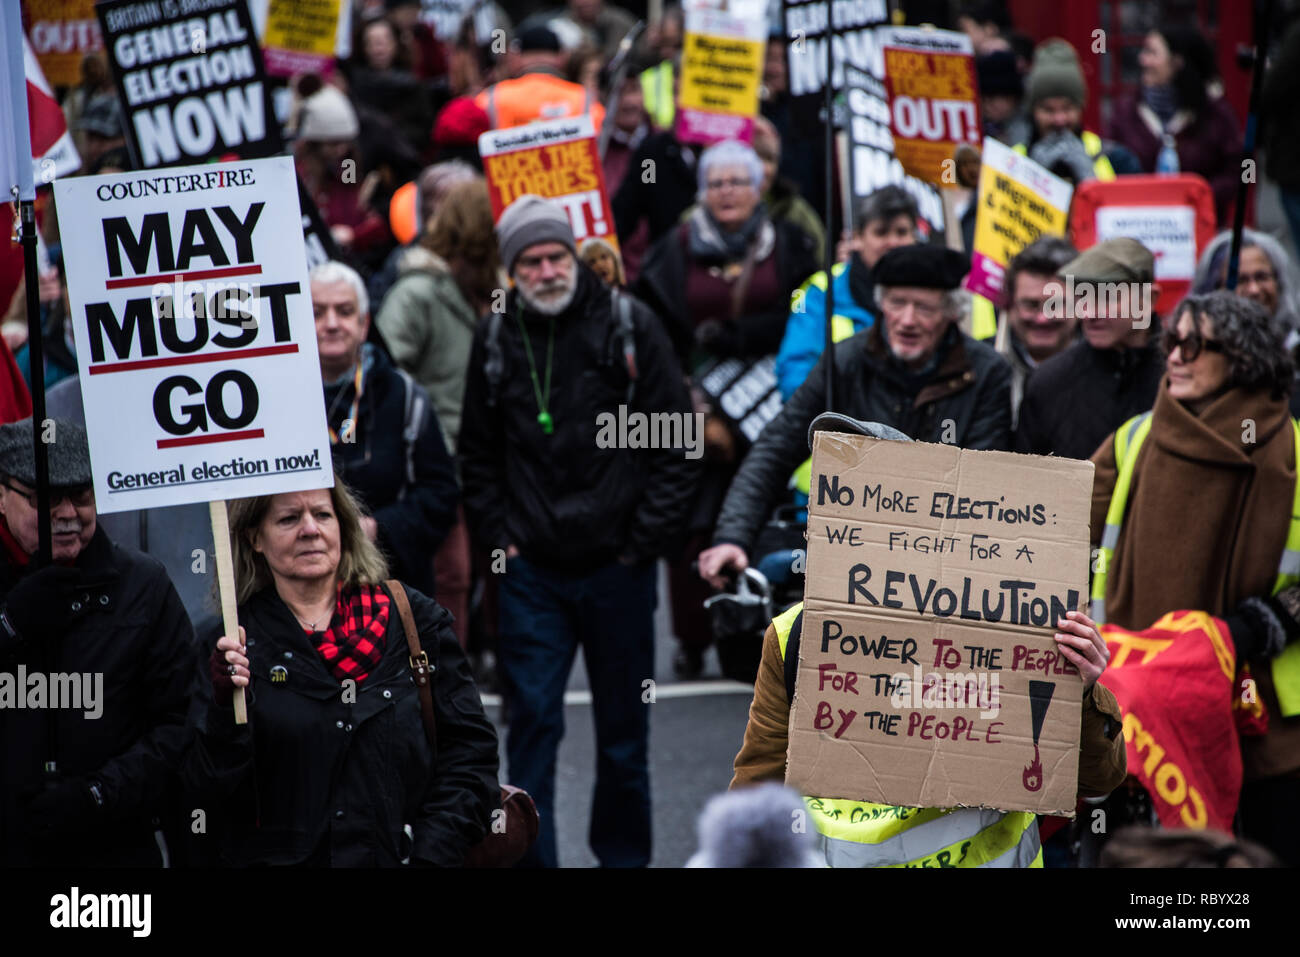 Protesters are seen holding placards during the protest. Thousands rallied in central London for the 'People’s Assembly against Austerity' inspired by the French 'Yellow Vest' protests bringing attention to austerity programs that have hit the poor hard. Stock Photo